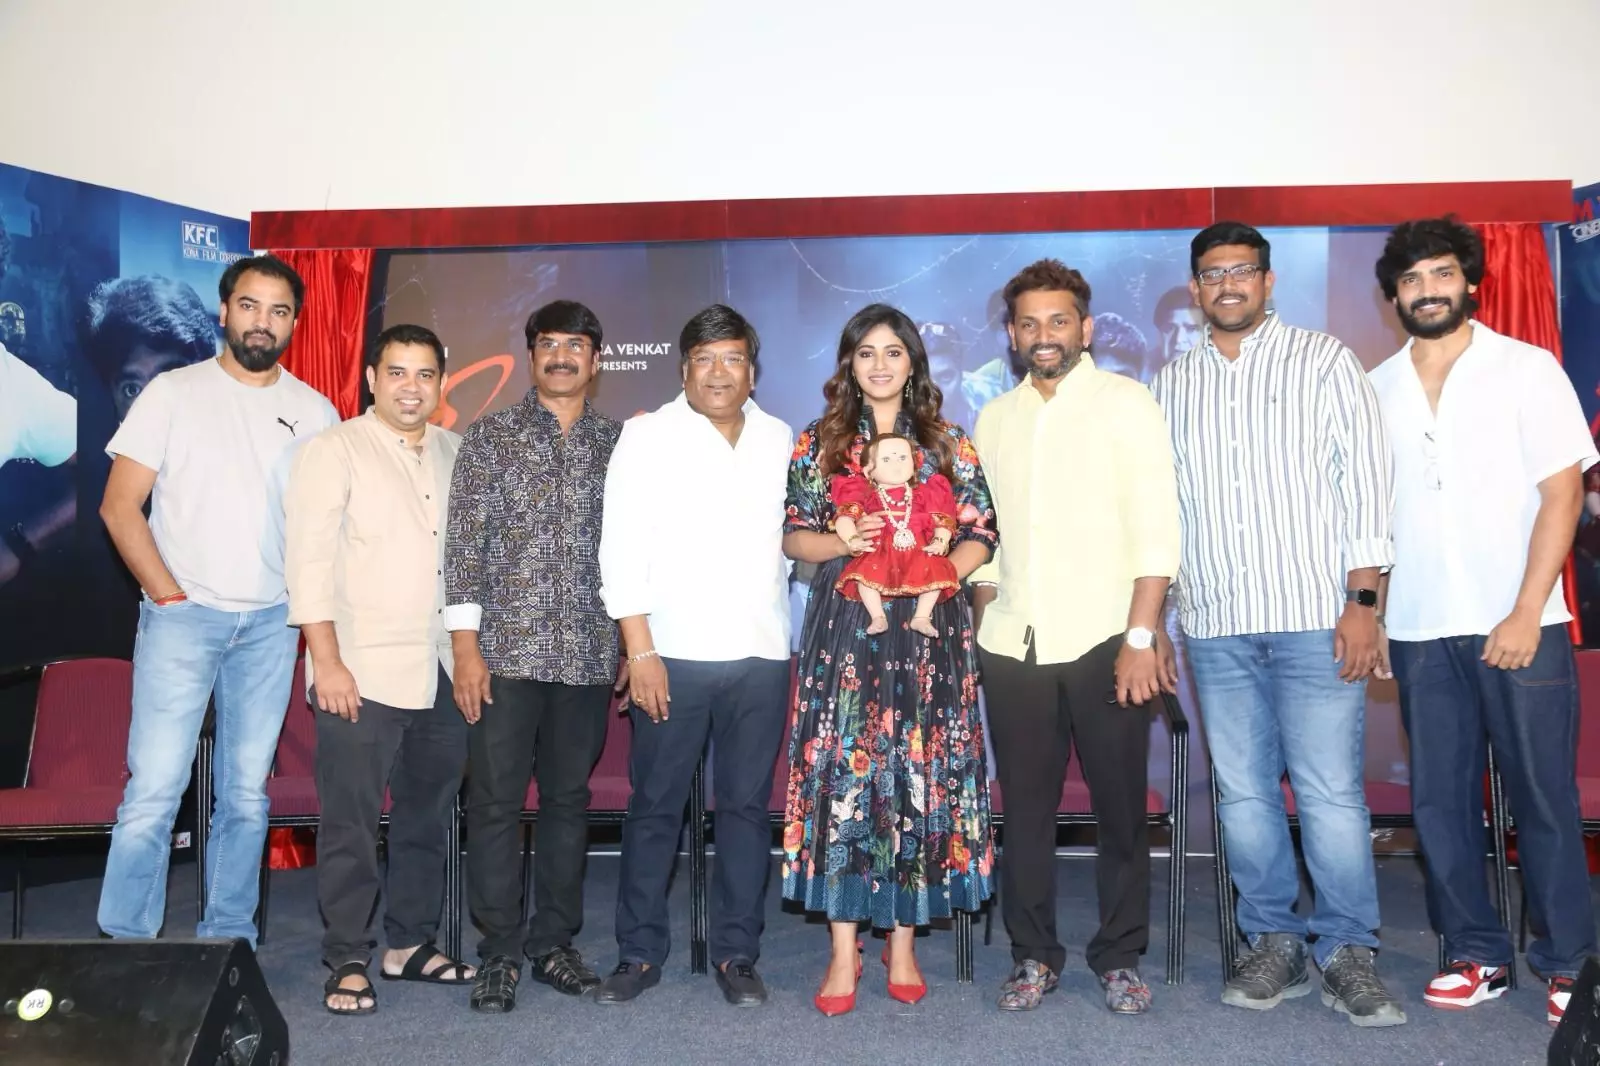 ‘Geethanjali Malli Vachindi’ team shares their excitement about the film